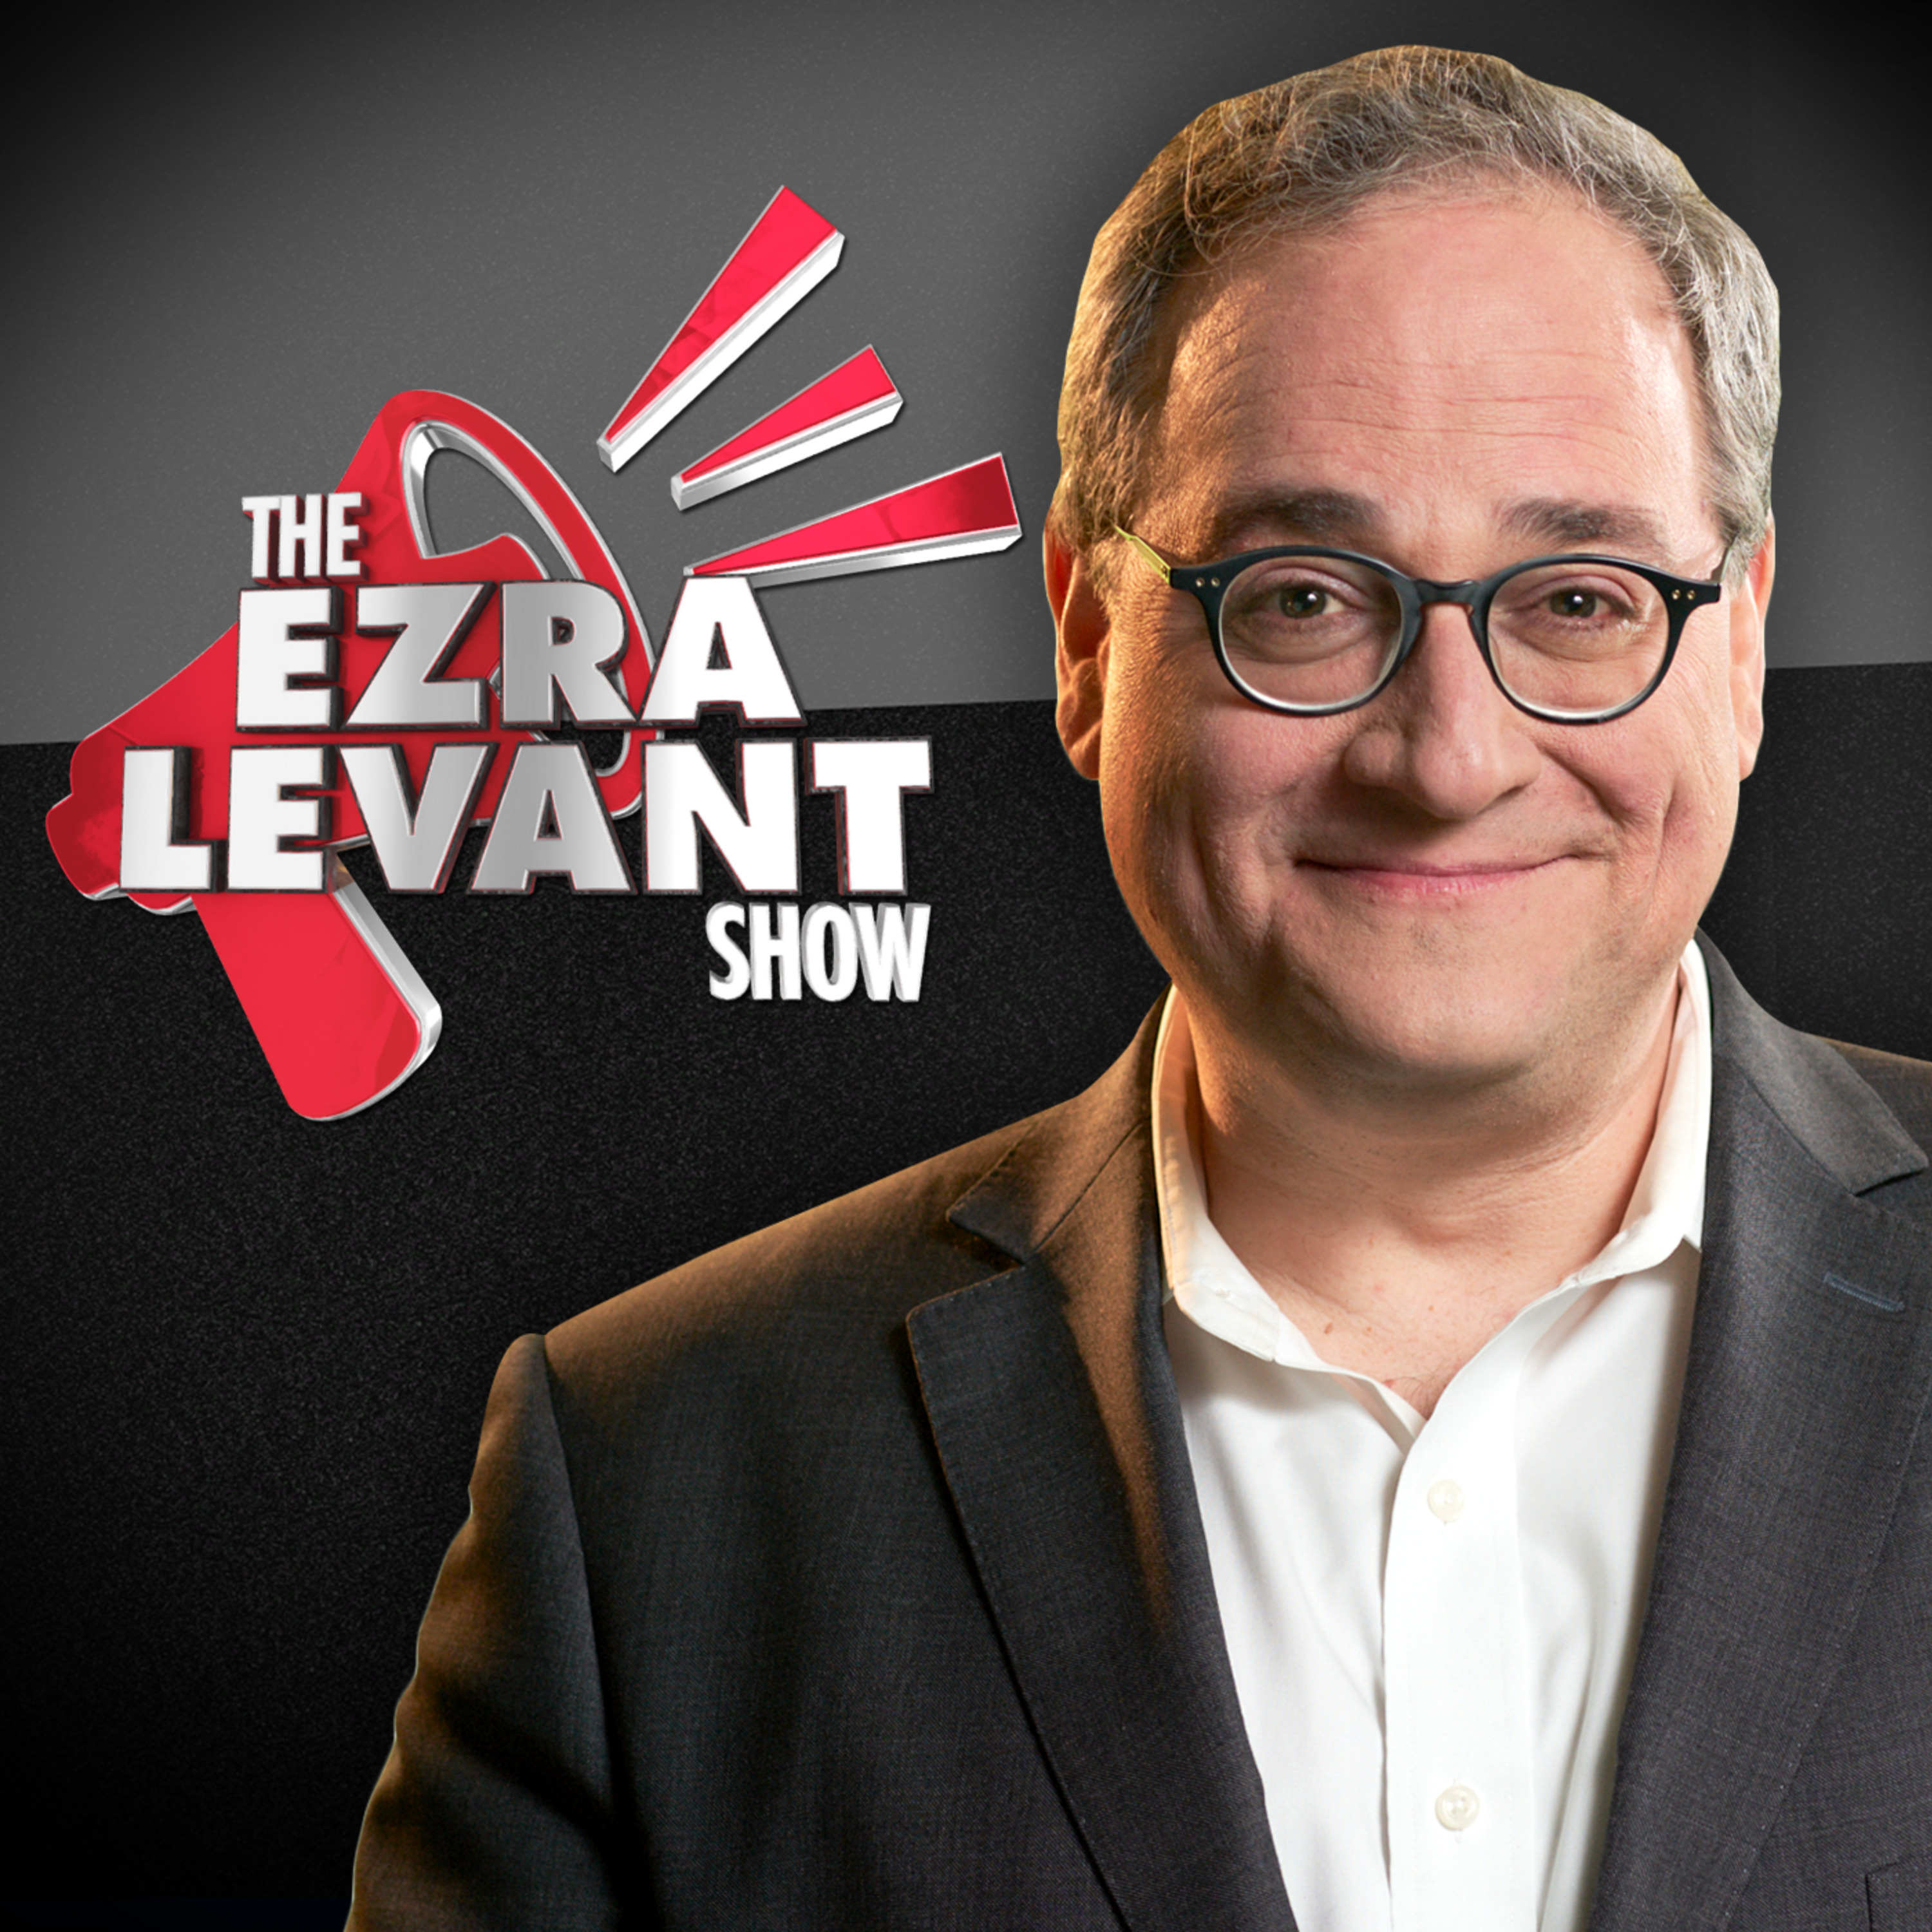 EZRA LEVANT | The consequences of cancel culture: A conversation with Christine Anderson